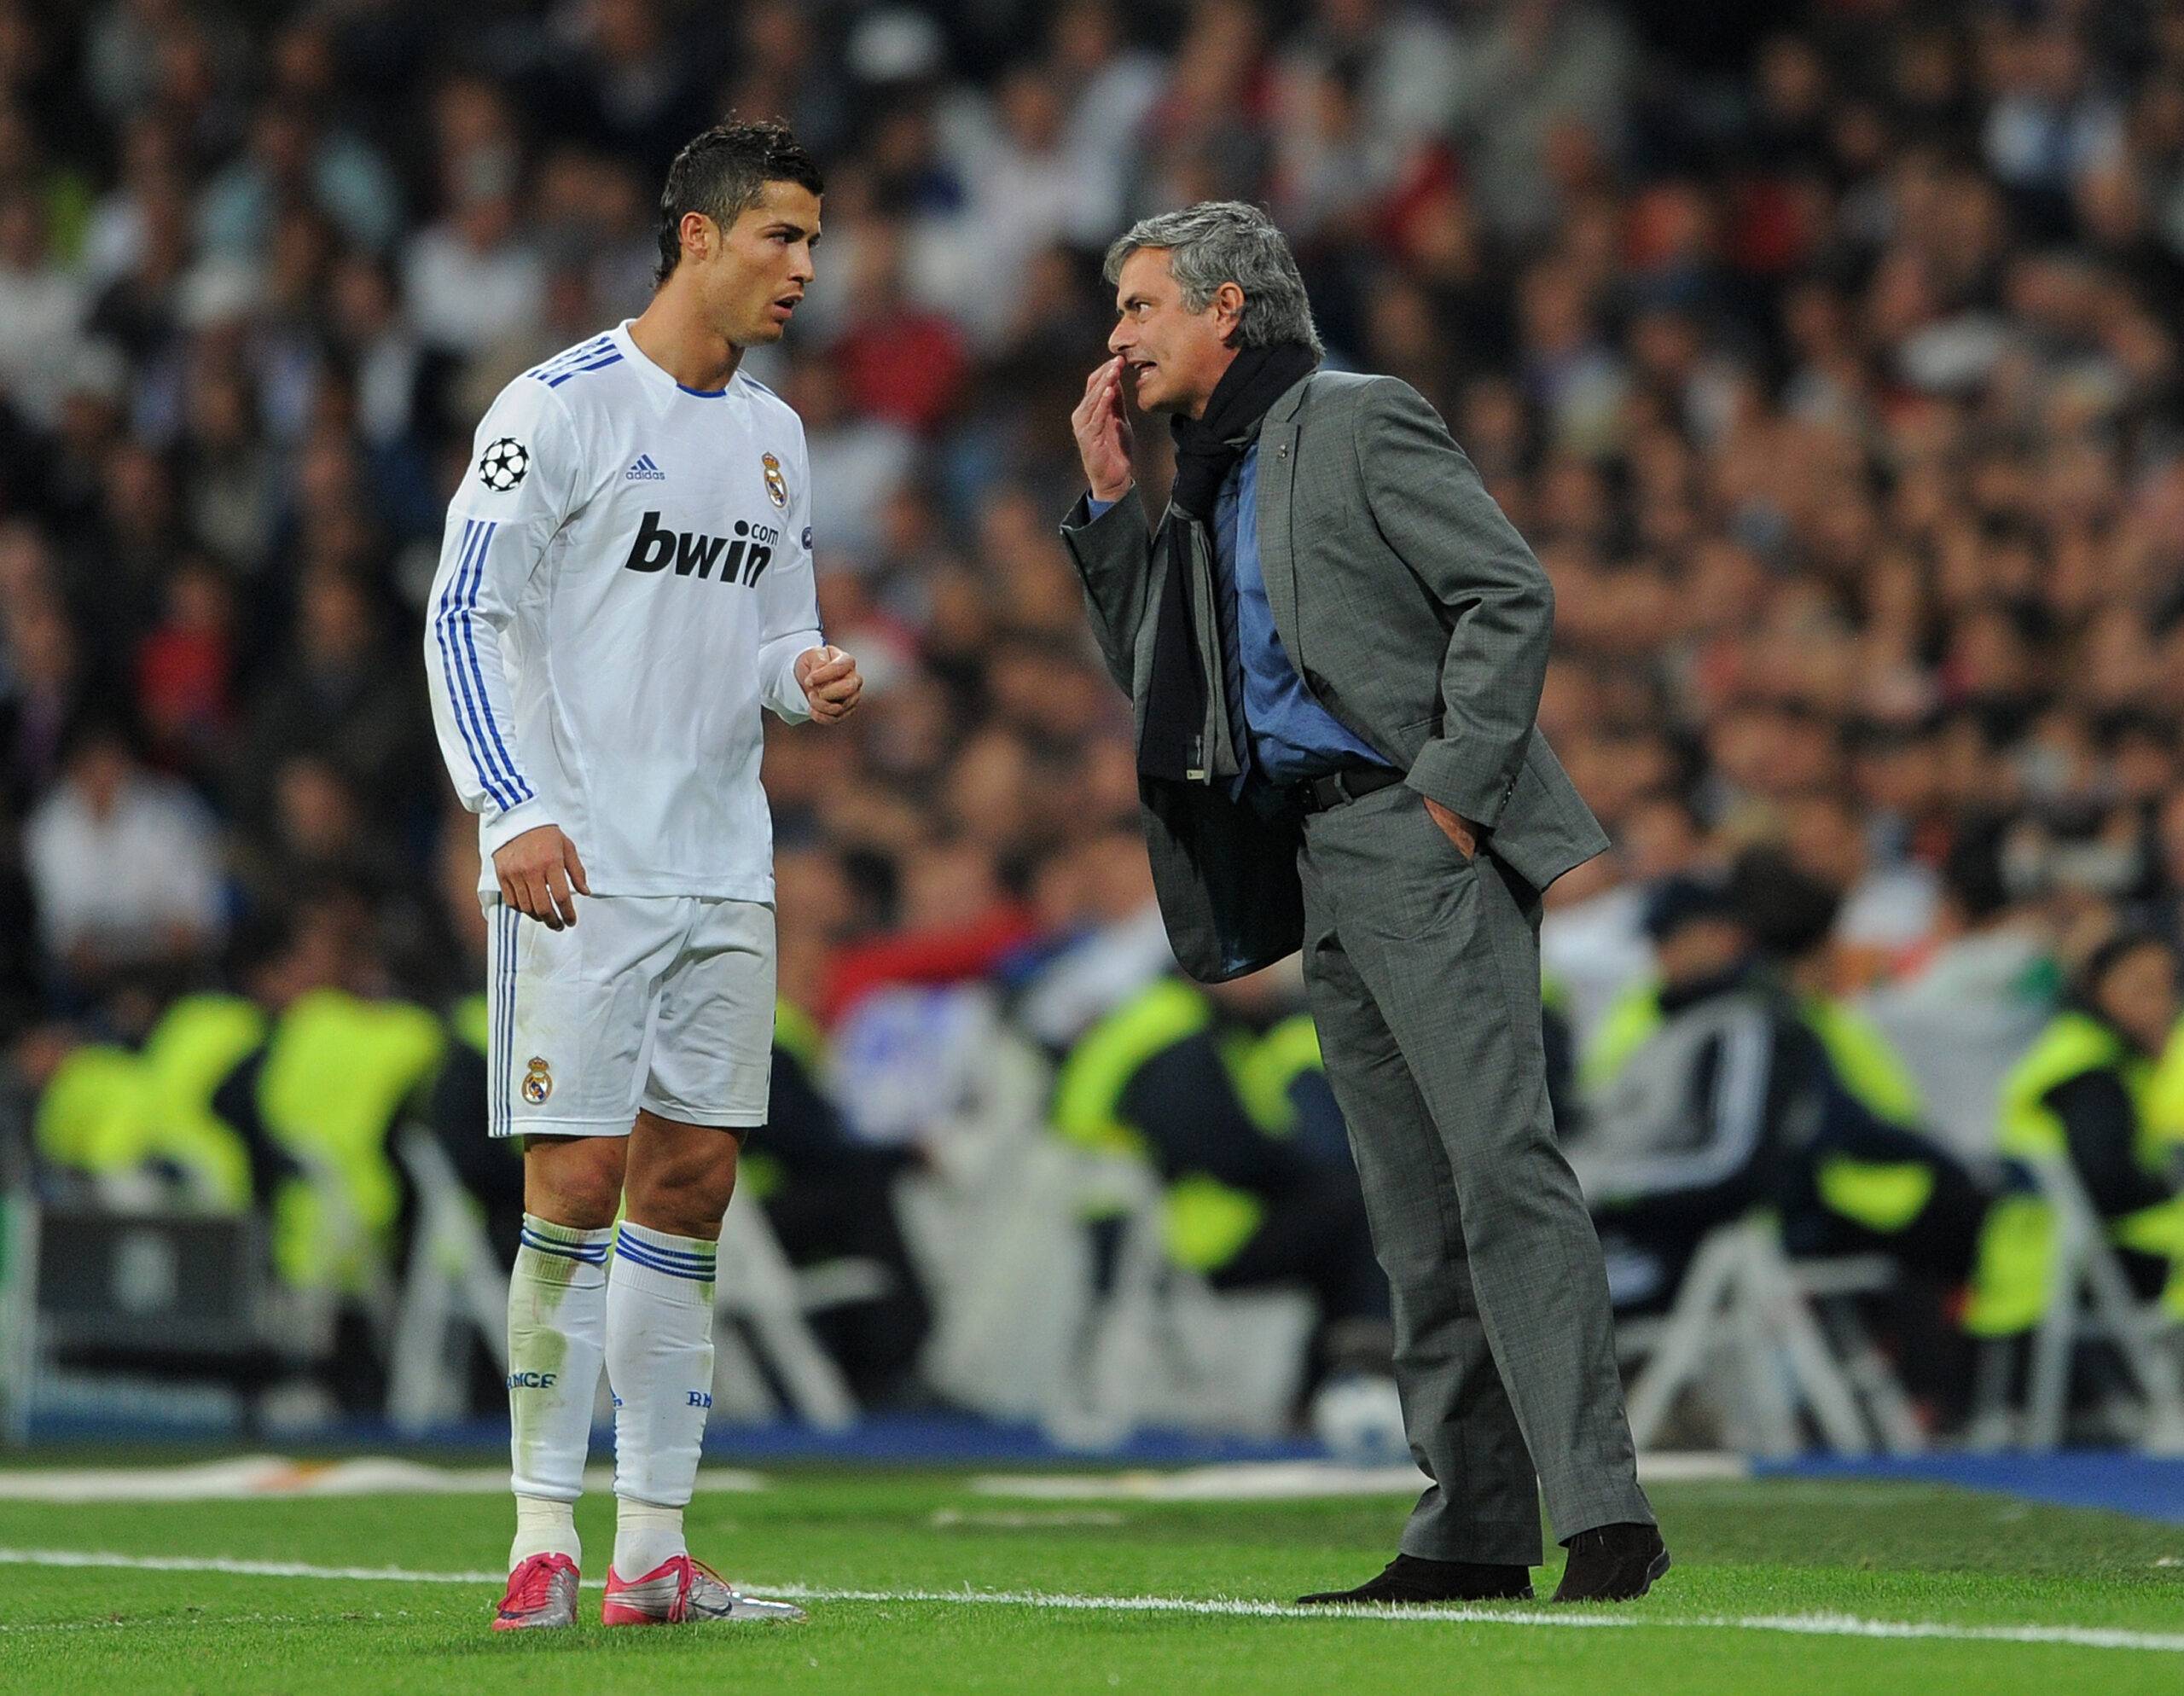 Ronaldo receives instructions from Mourinho at Real Madrid